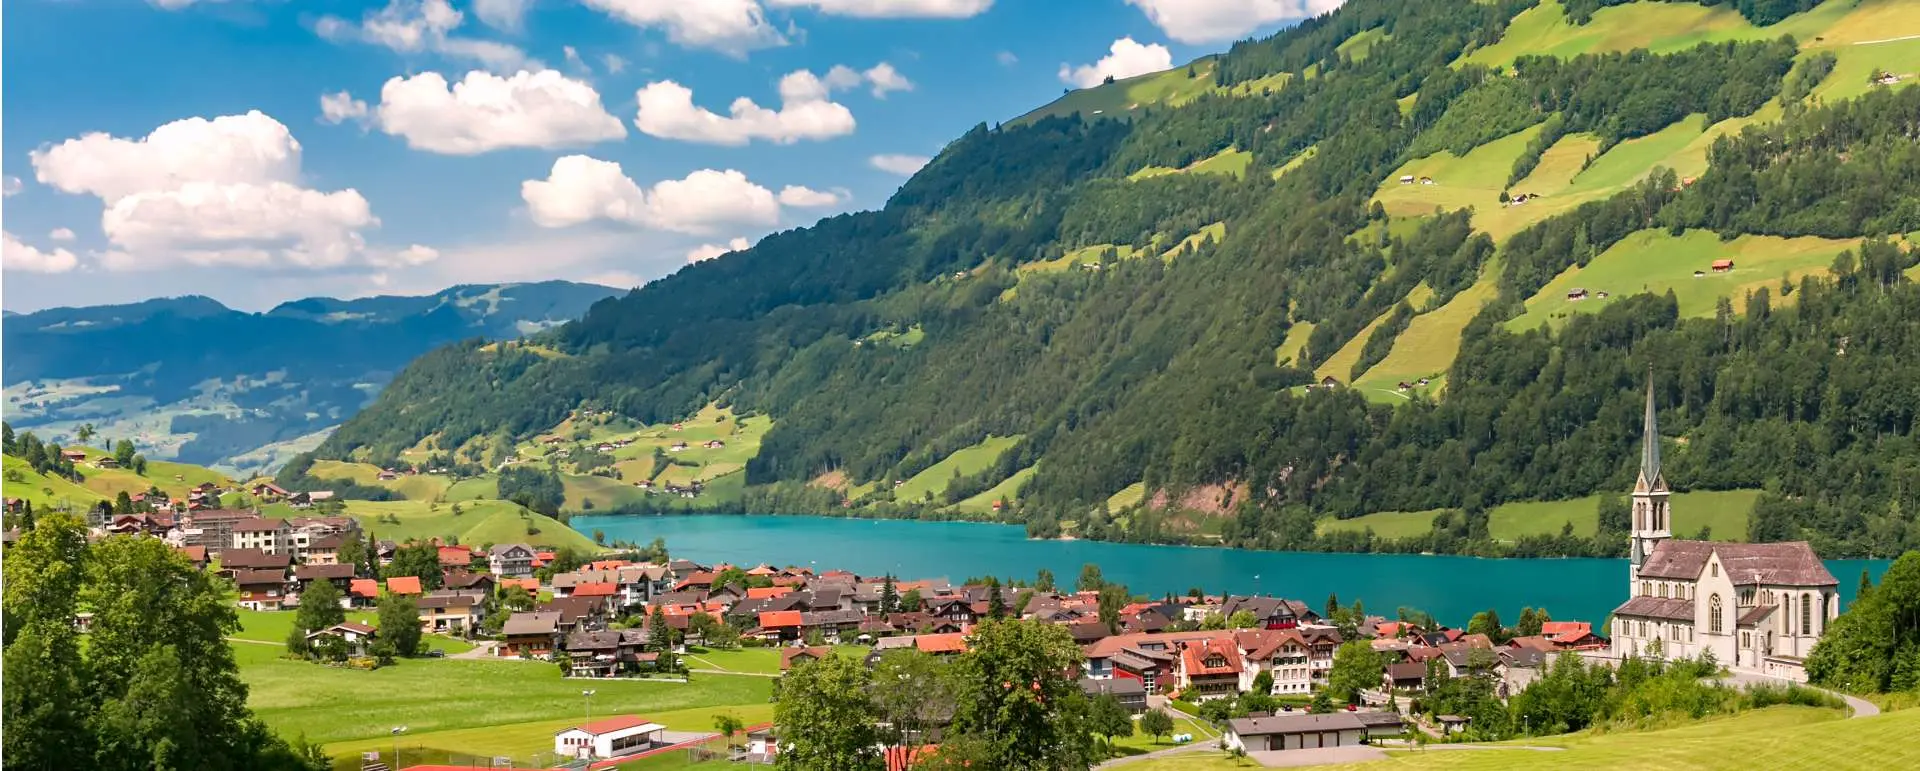 Obwalden - Group travel for 80 persons accommodations